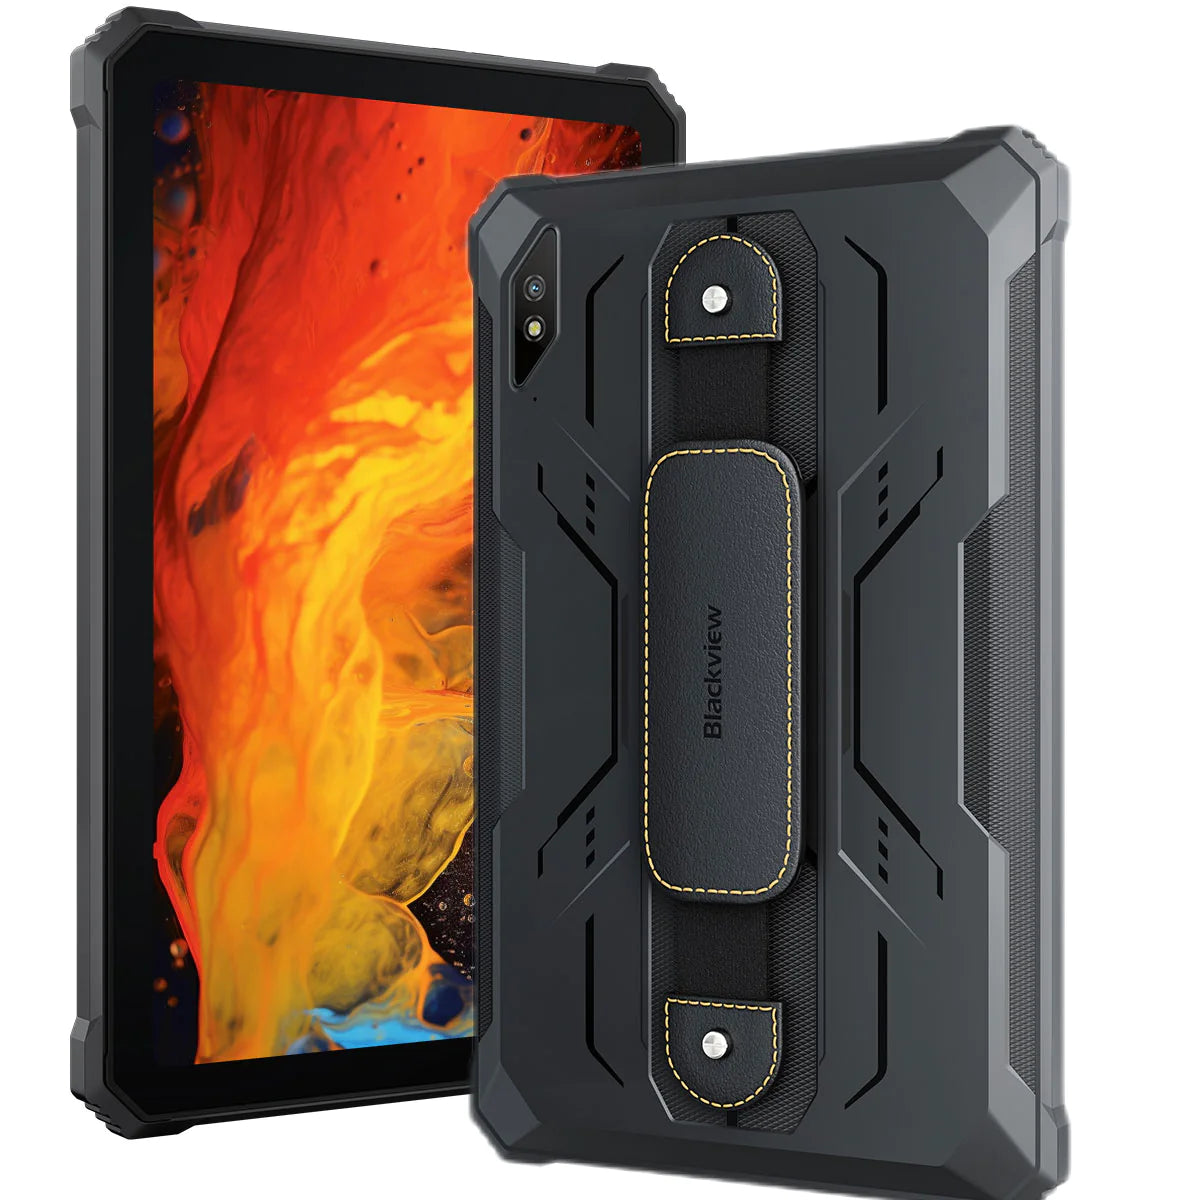 Blackview Active 8 Pro Rugged Tablet - Blackview